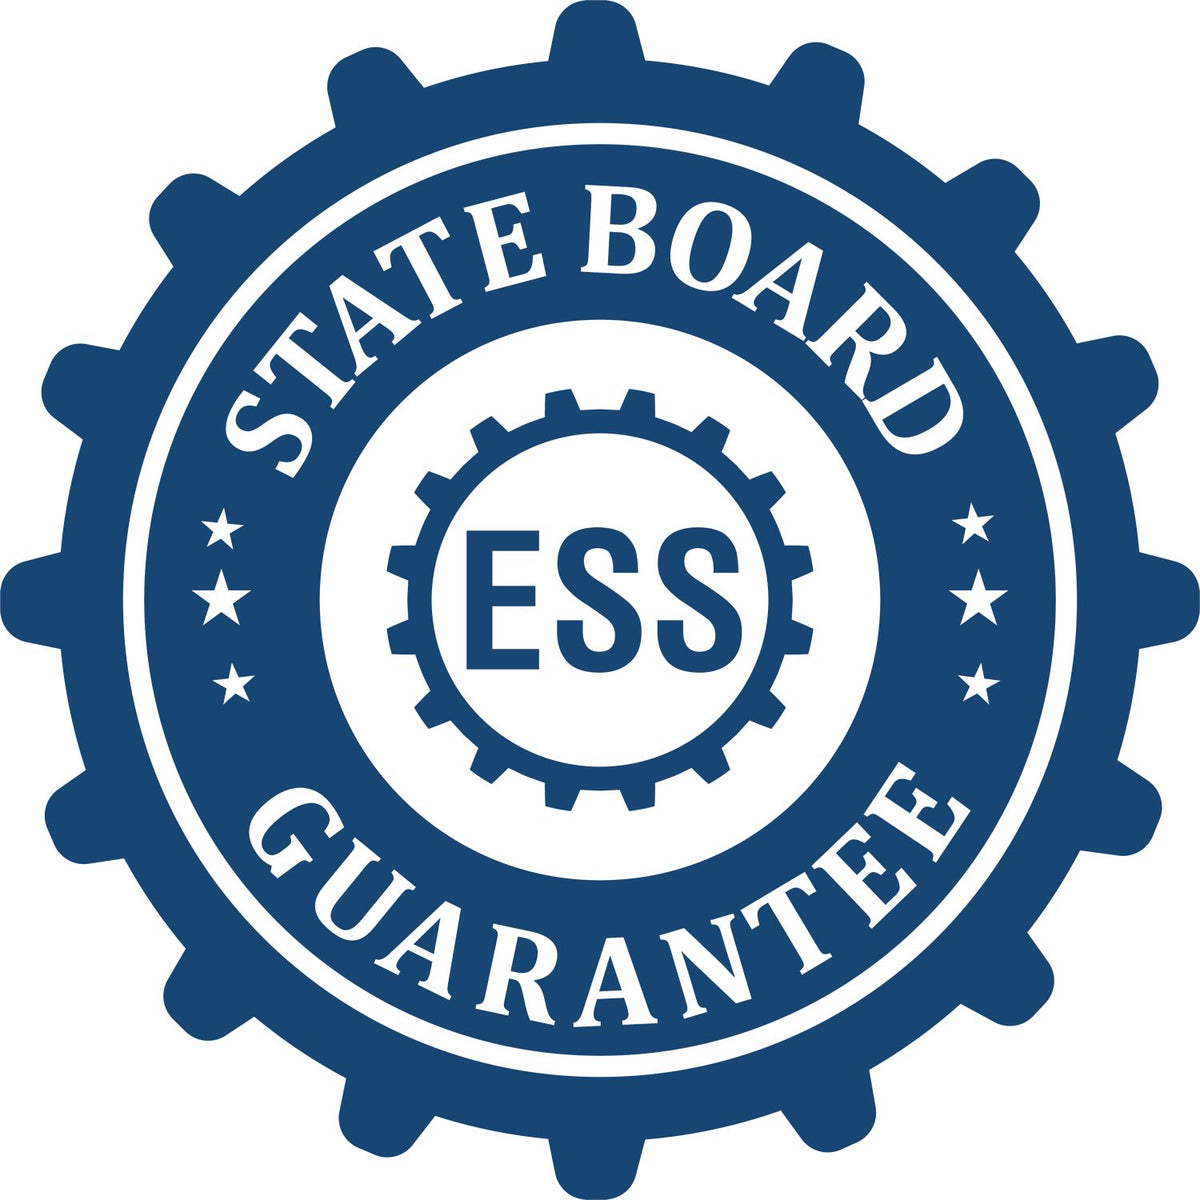 An emblem in a gear shape illustrating a state board guarantee for the Hybrid Nebraska Architect Seal